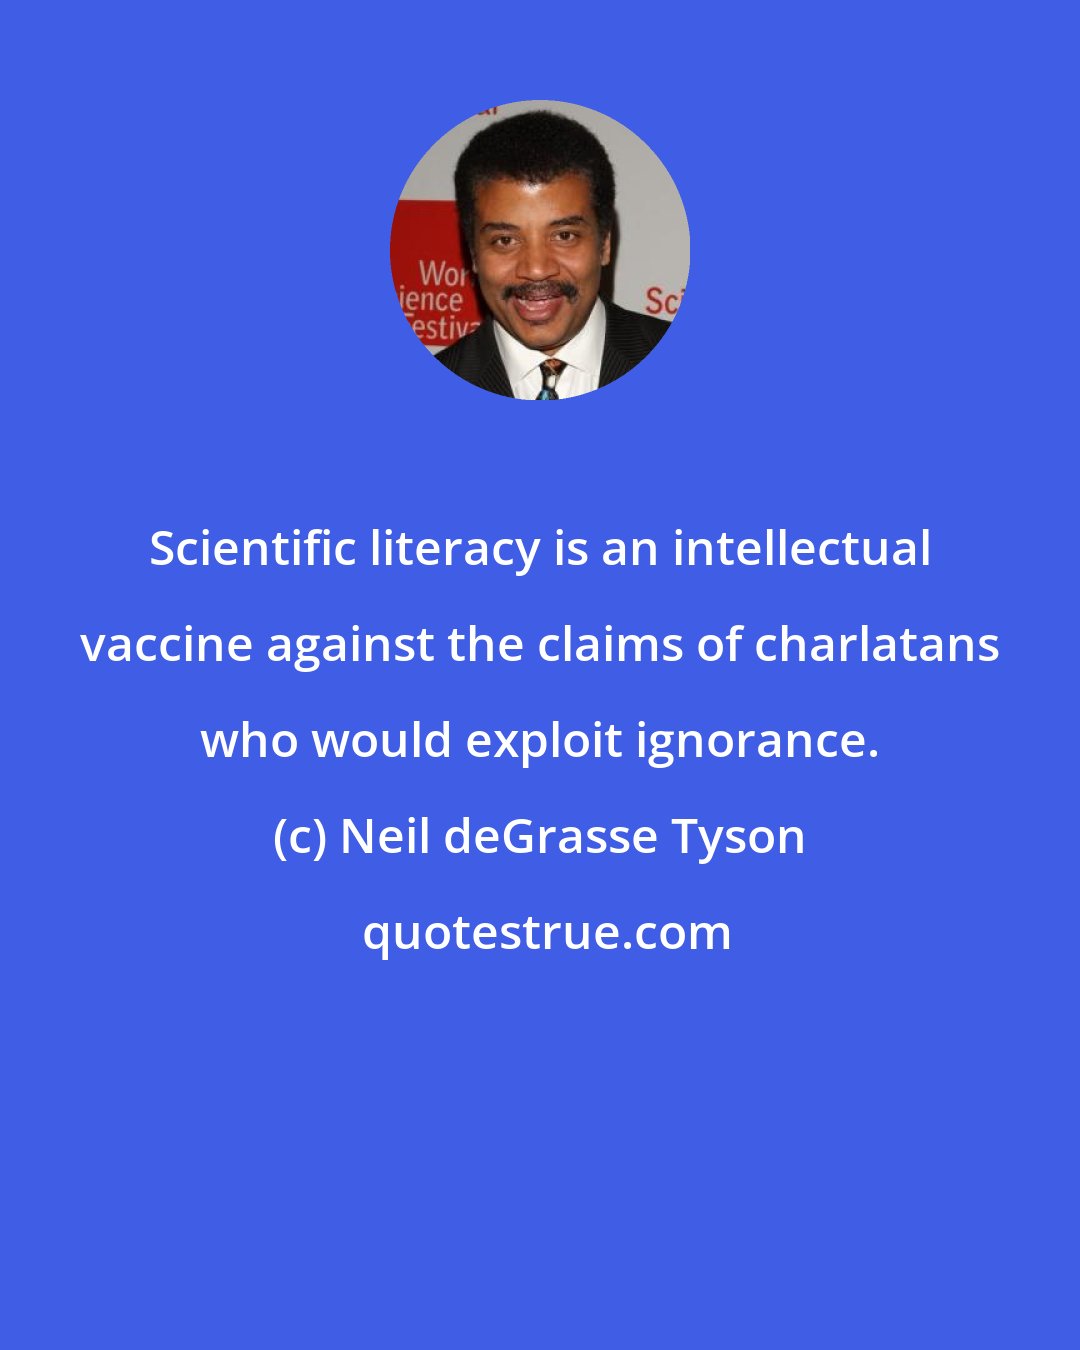 Neil deGrasse Tyson: Scientific literacy is an intellectual vaccine against the claims of charlatans who would exploit ignorance.